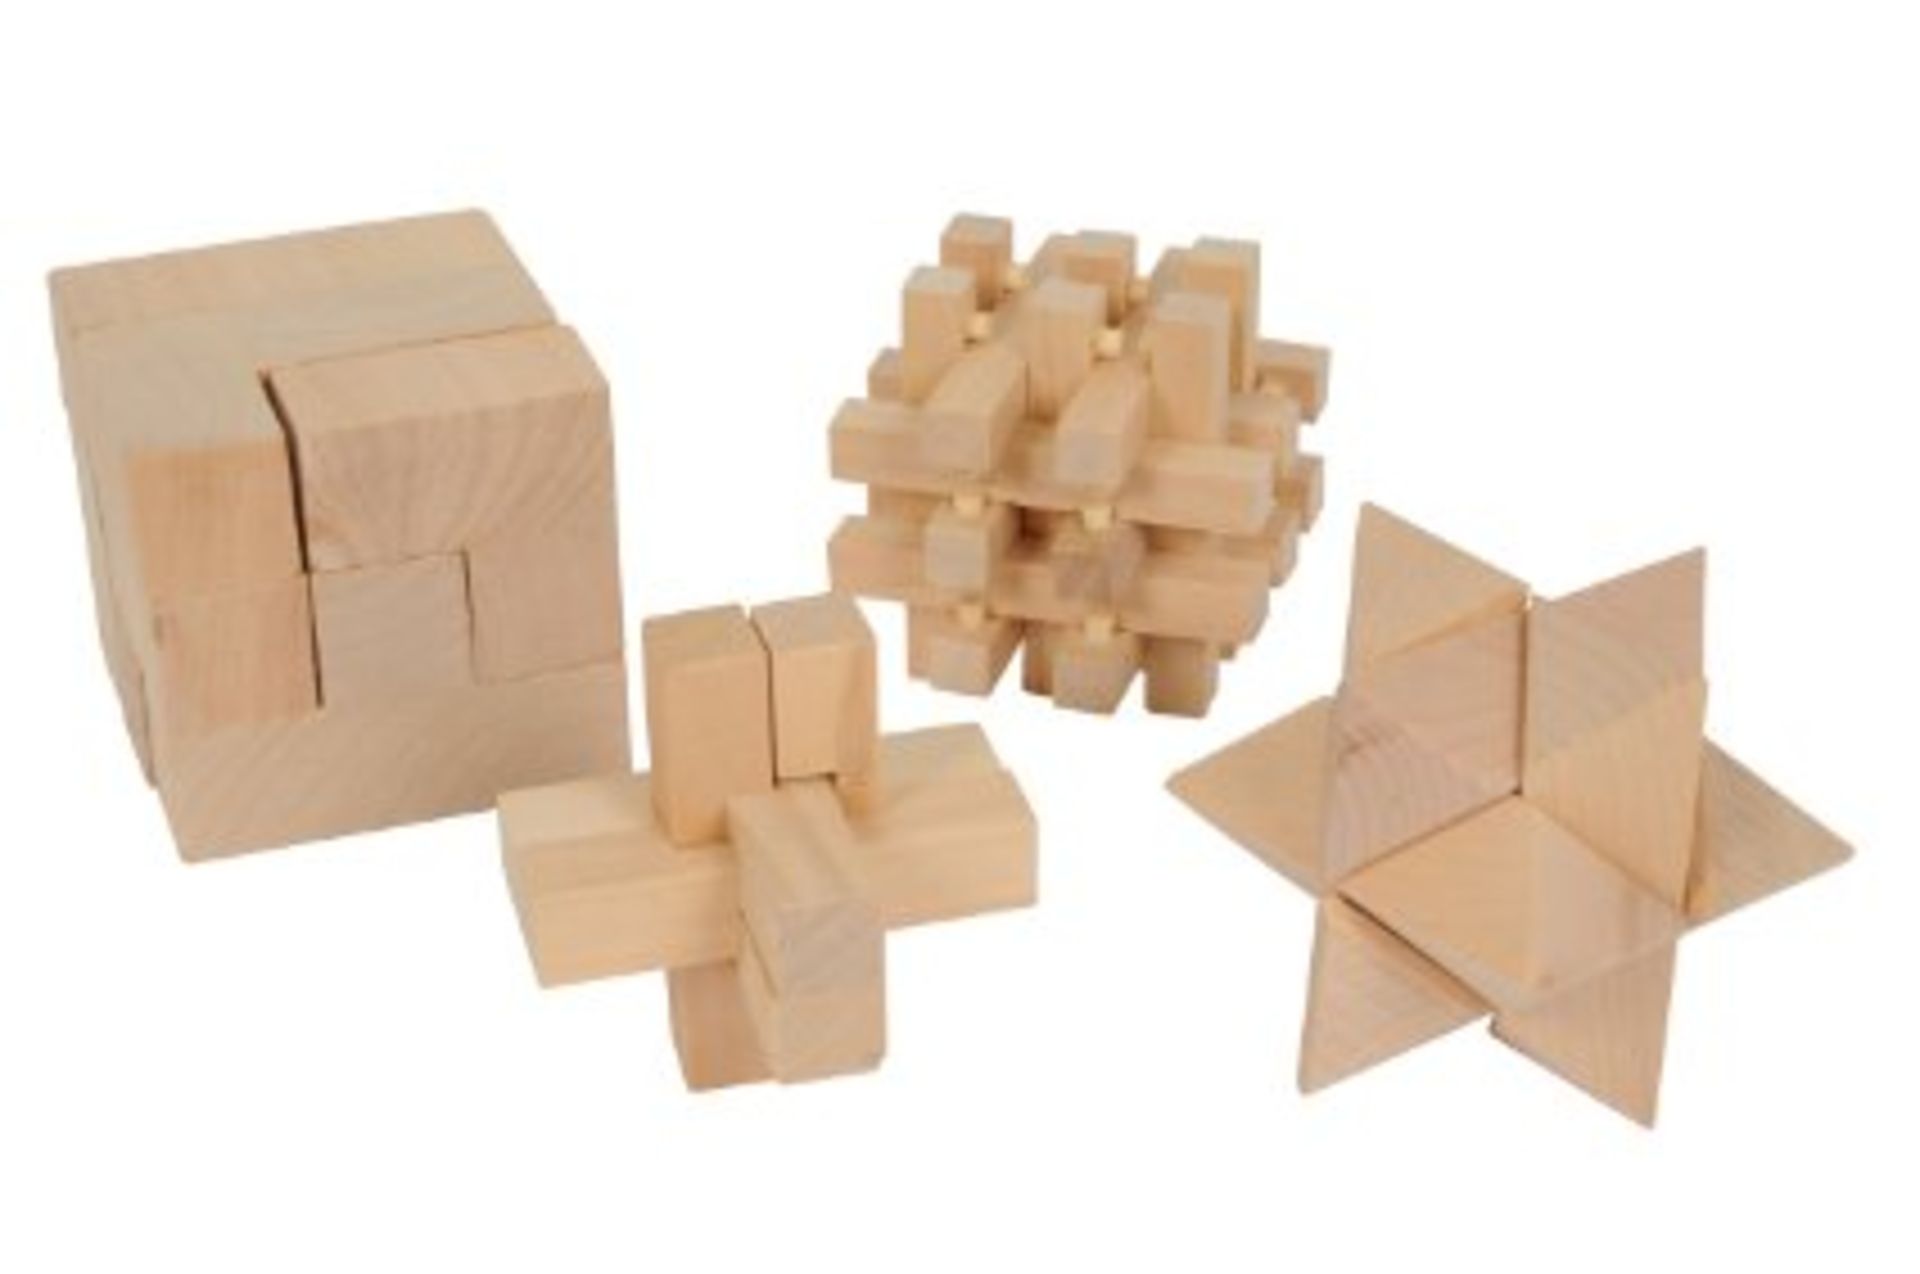 V Brand New Boxed Set Four Quality Wooden Brain Teaser Puzzles £10.89 on Ebay X 2 Bid price to be